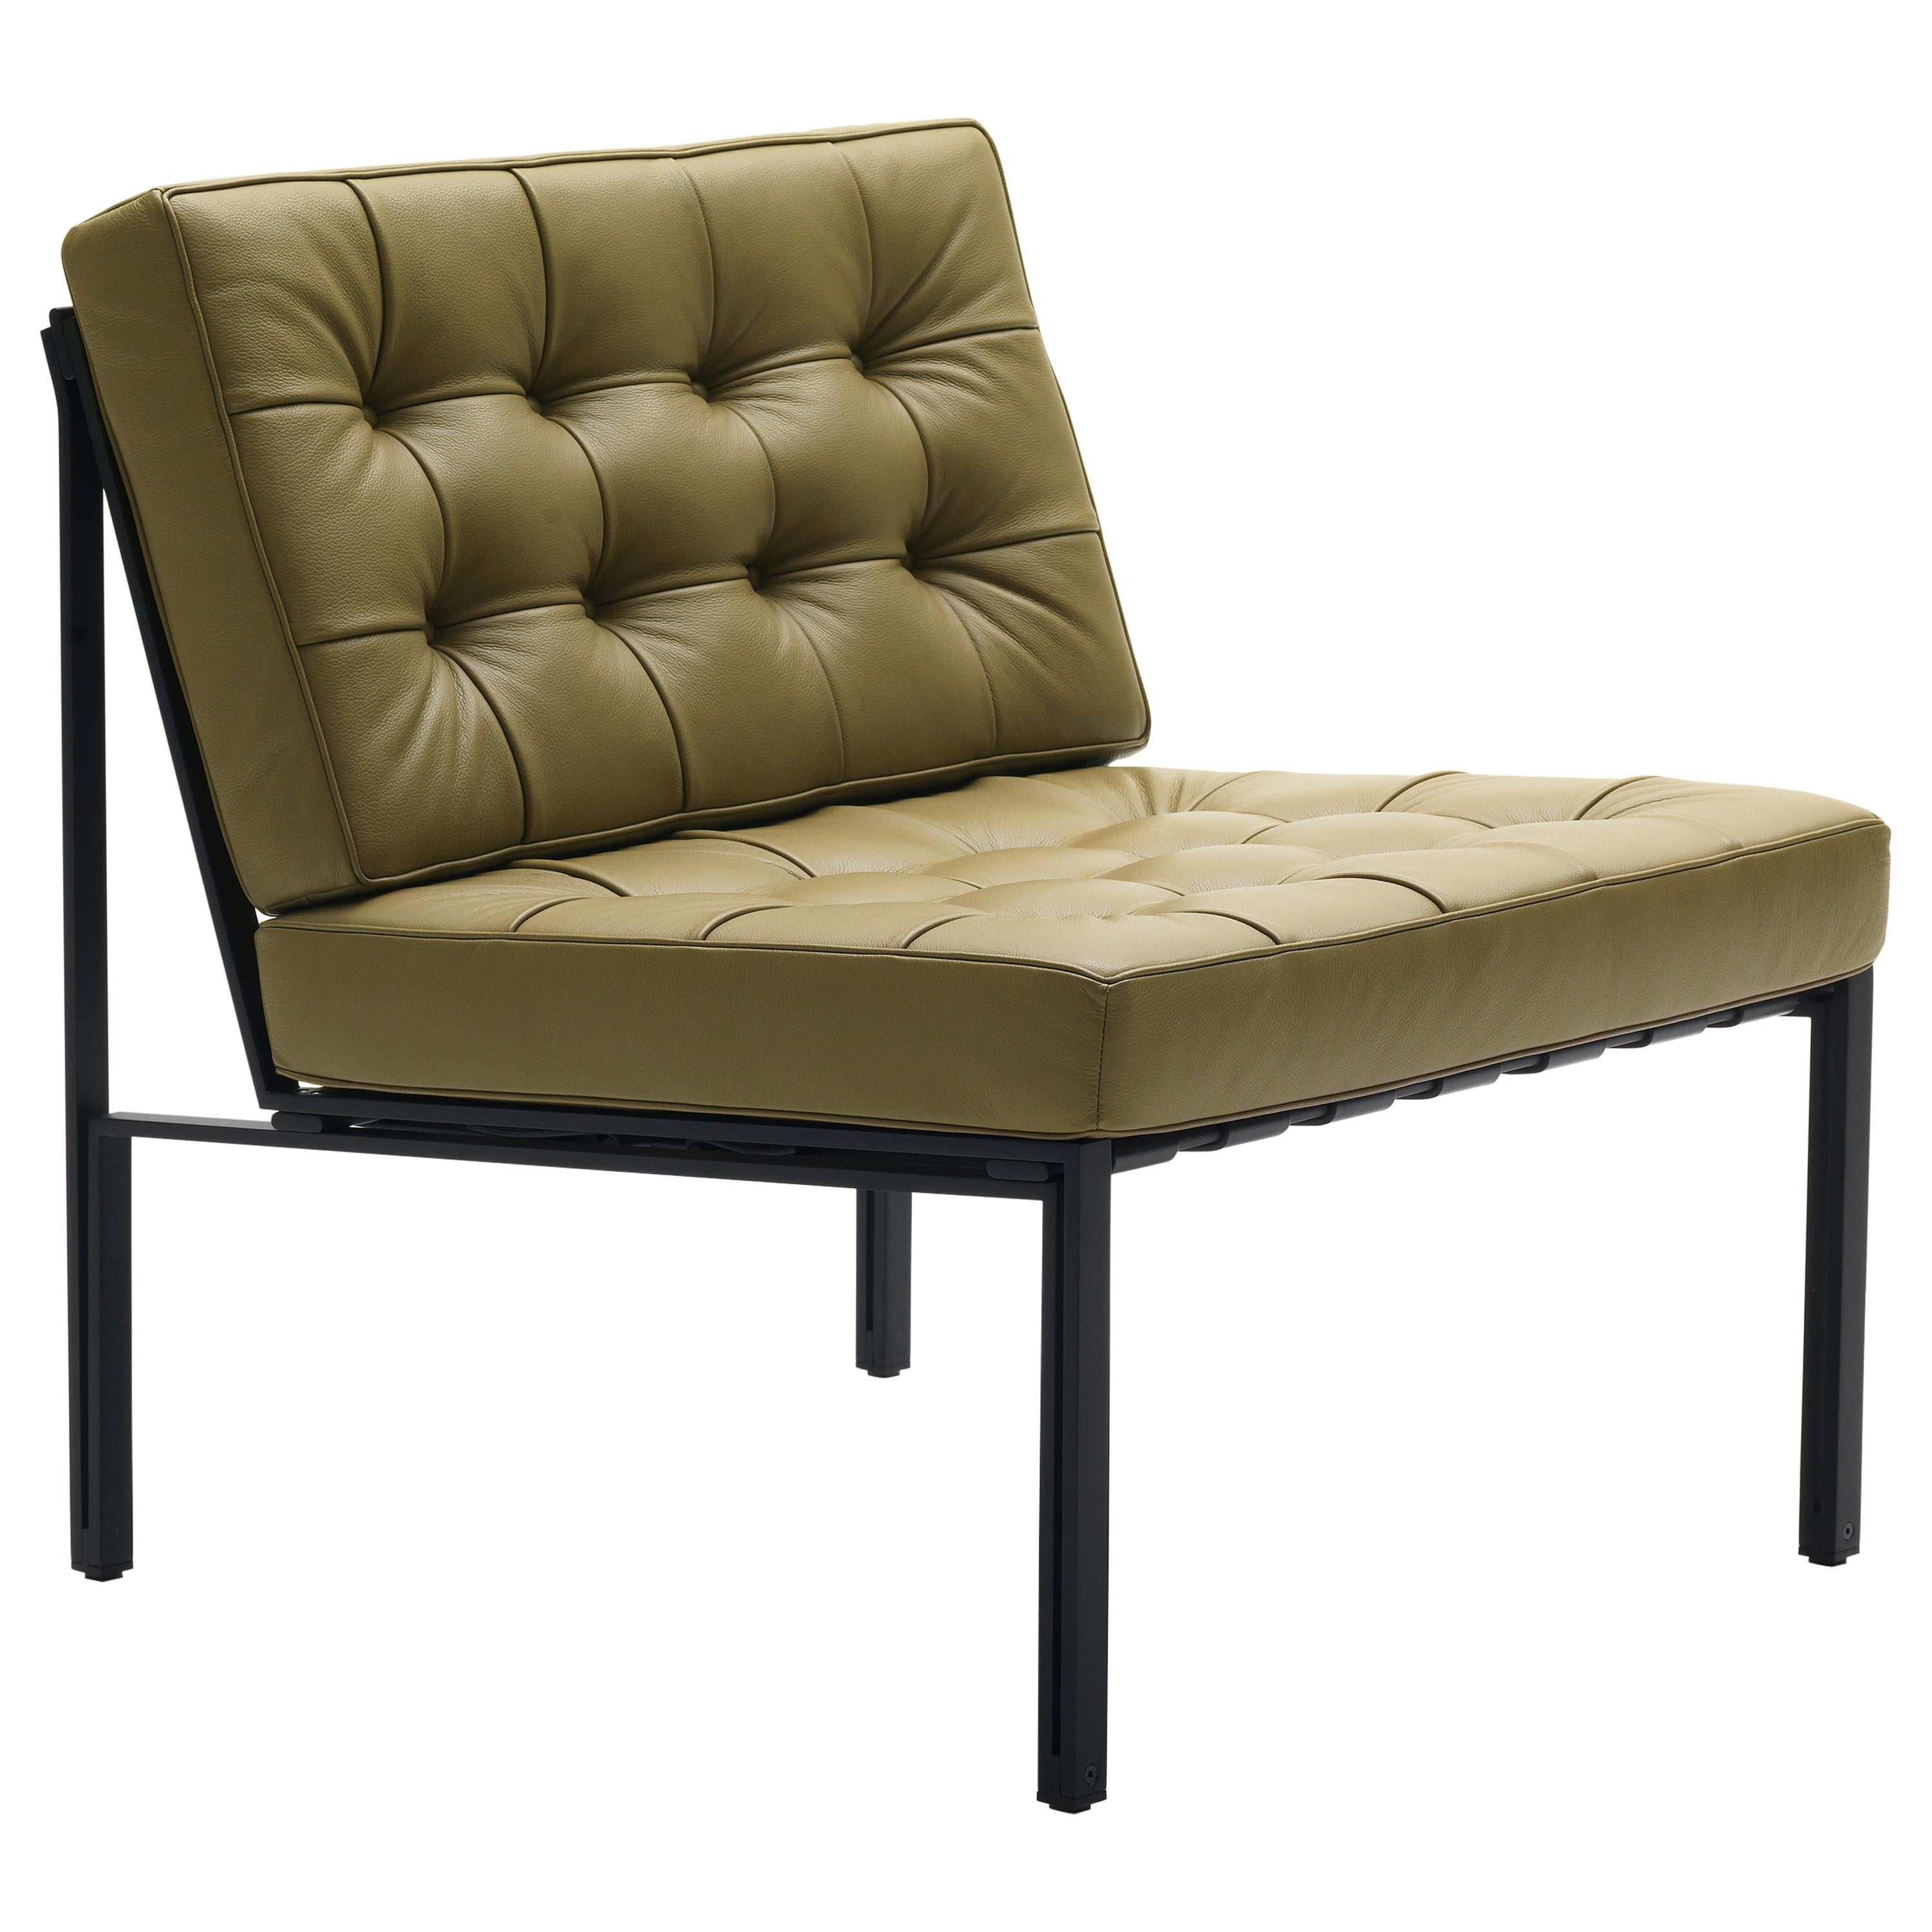 For Sale: Green (Olive) KT-221 Bauhaus Occasional Chair in Tufted Natural Leather and Metal by De Sede